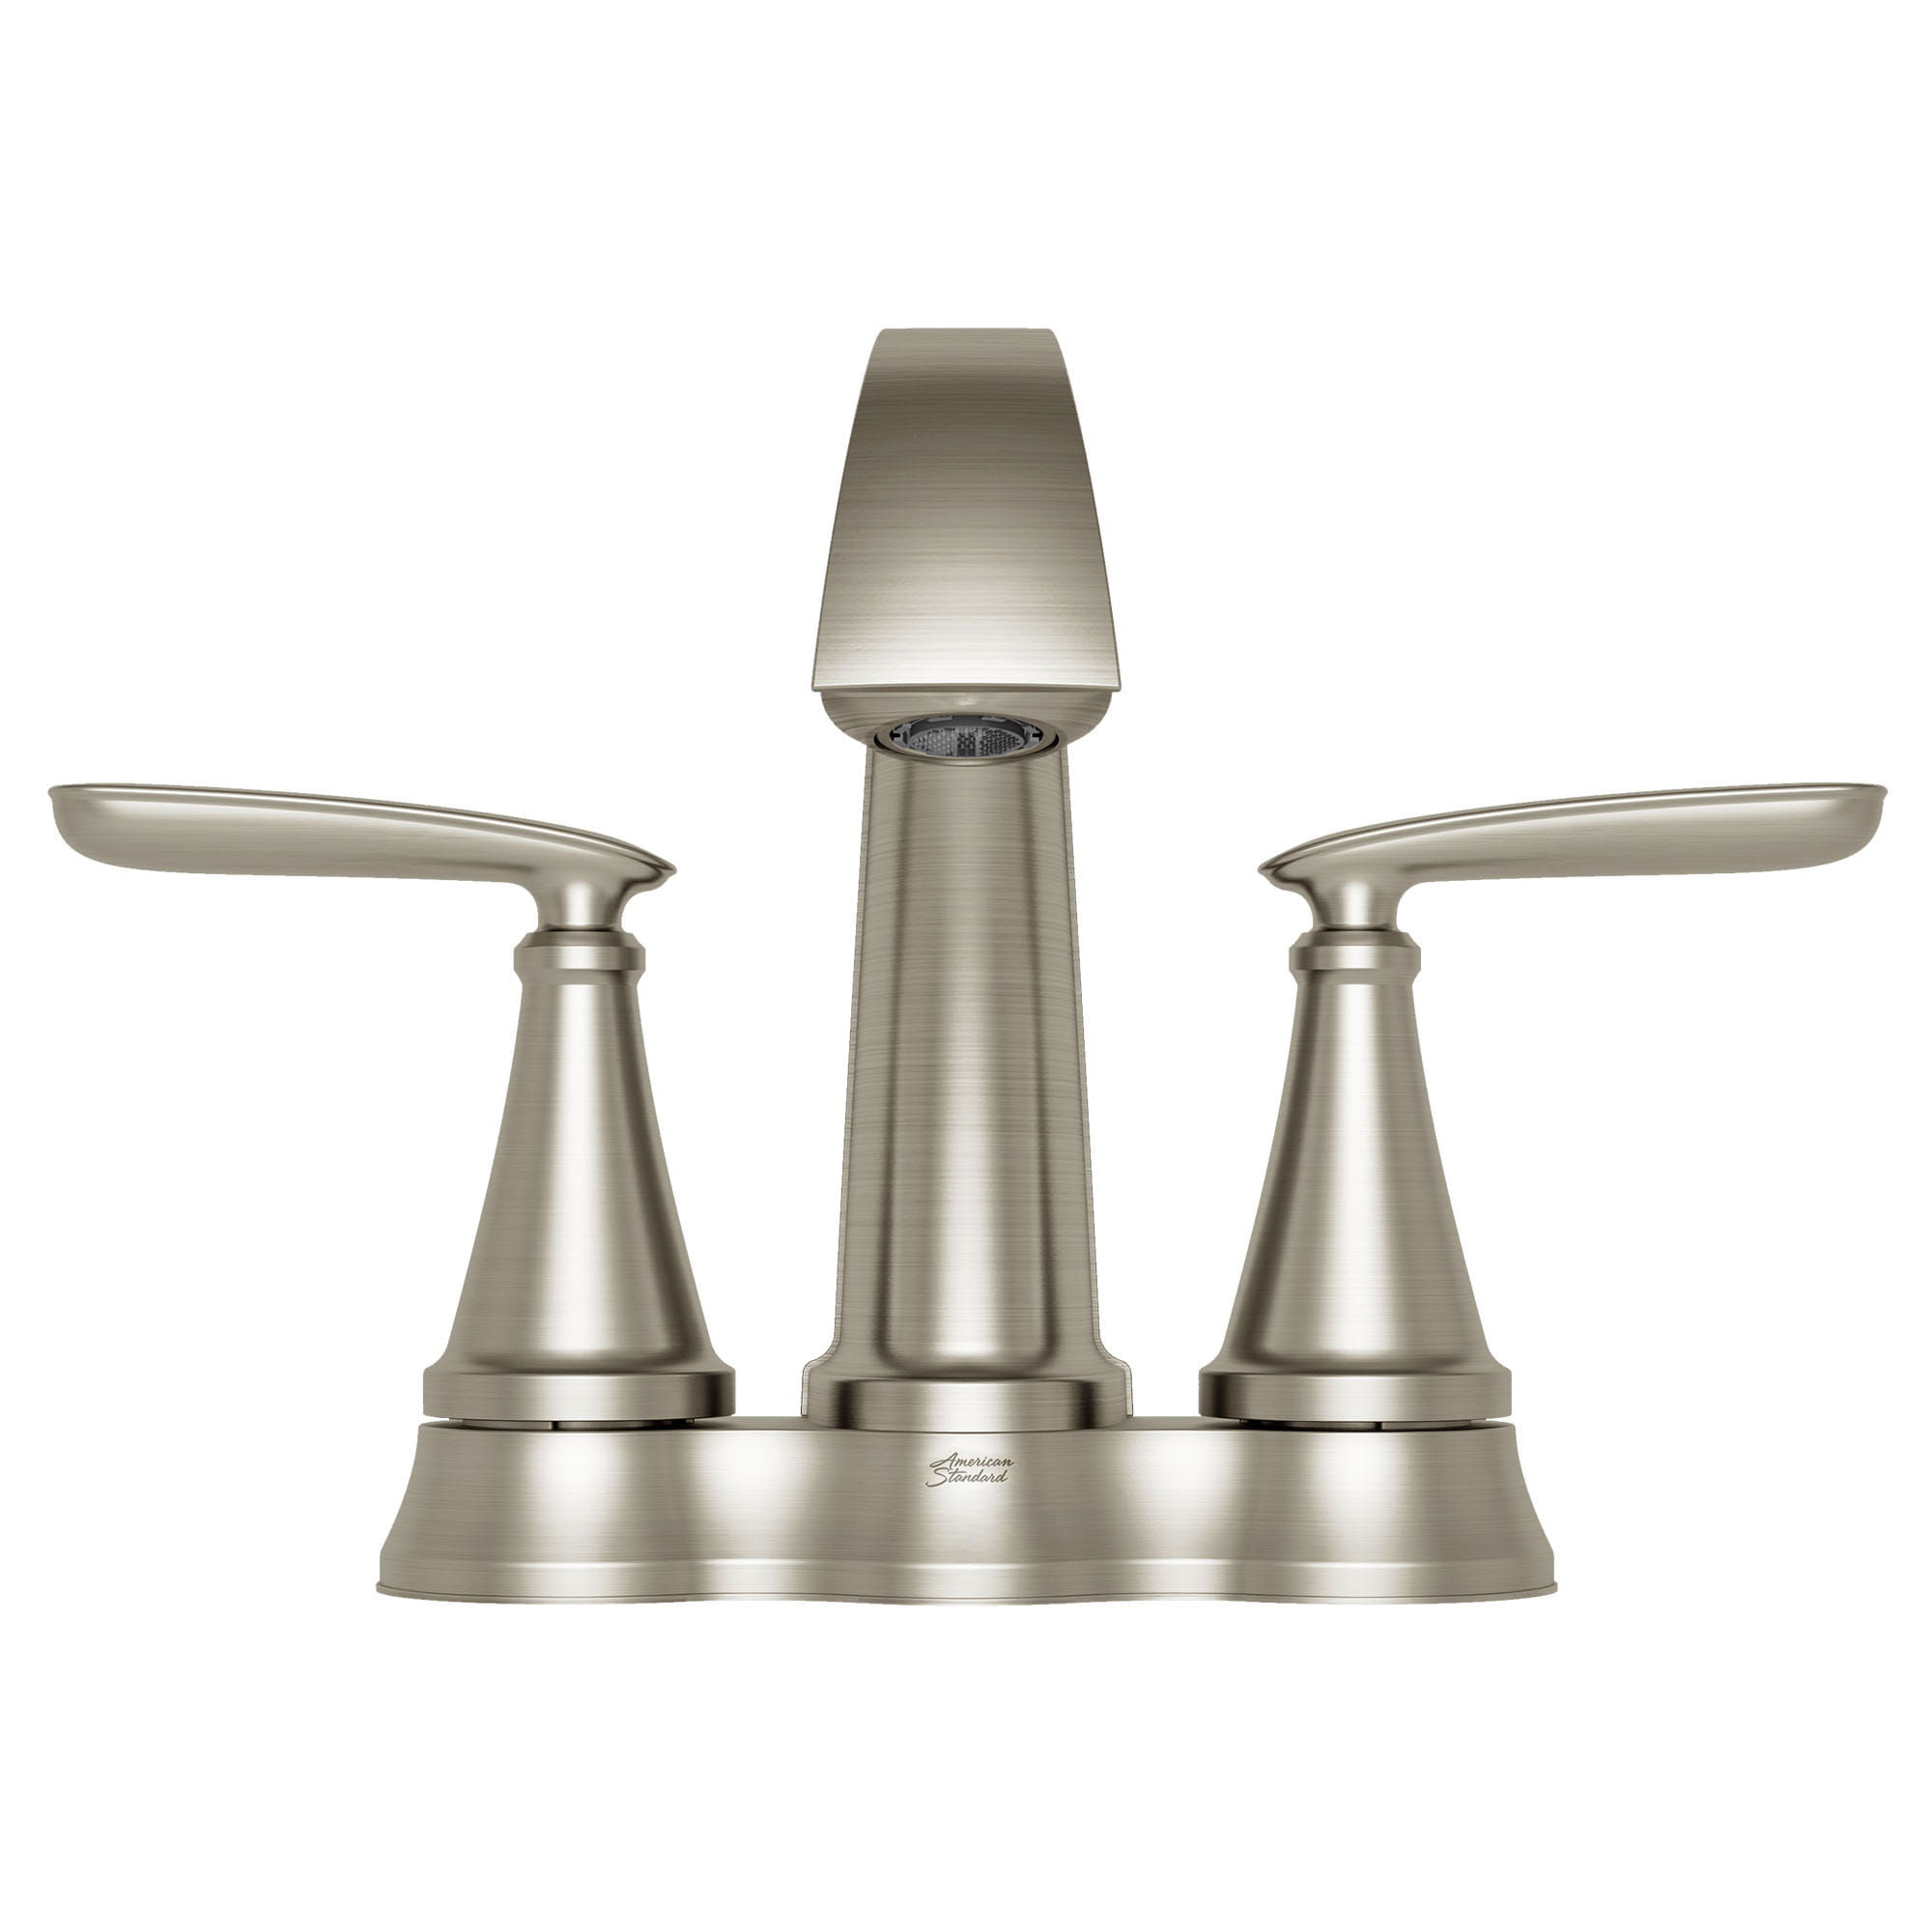 Somerville 4 In Centerset 2 Handle Bathroom Faucet 12 GPM with Lever Handles BRUSHED NICKEL